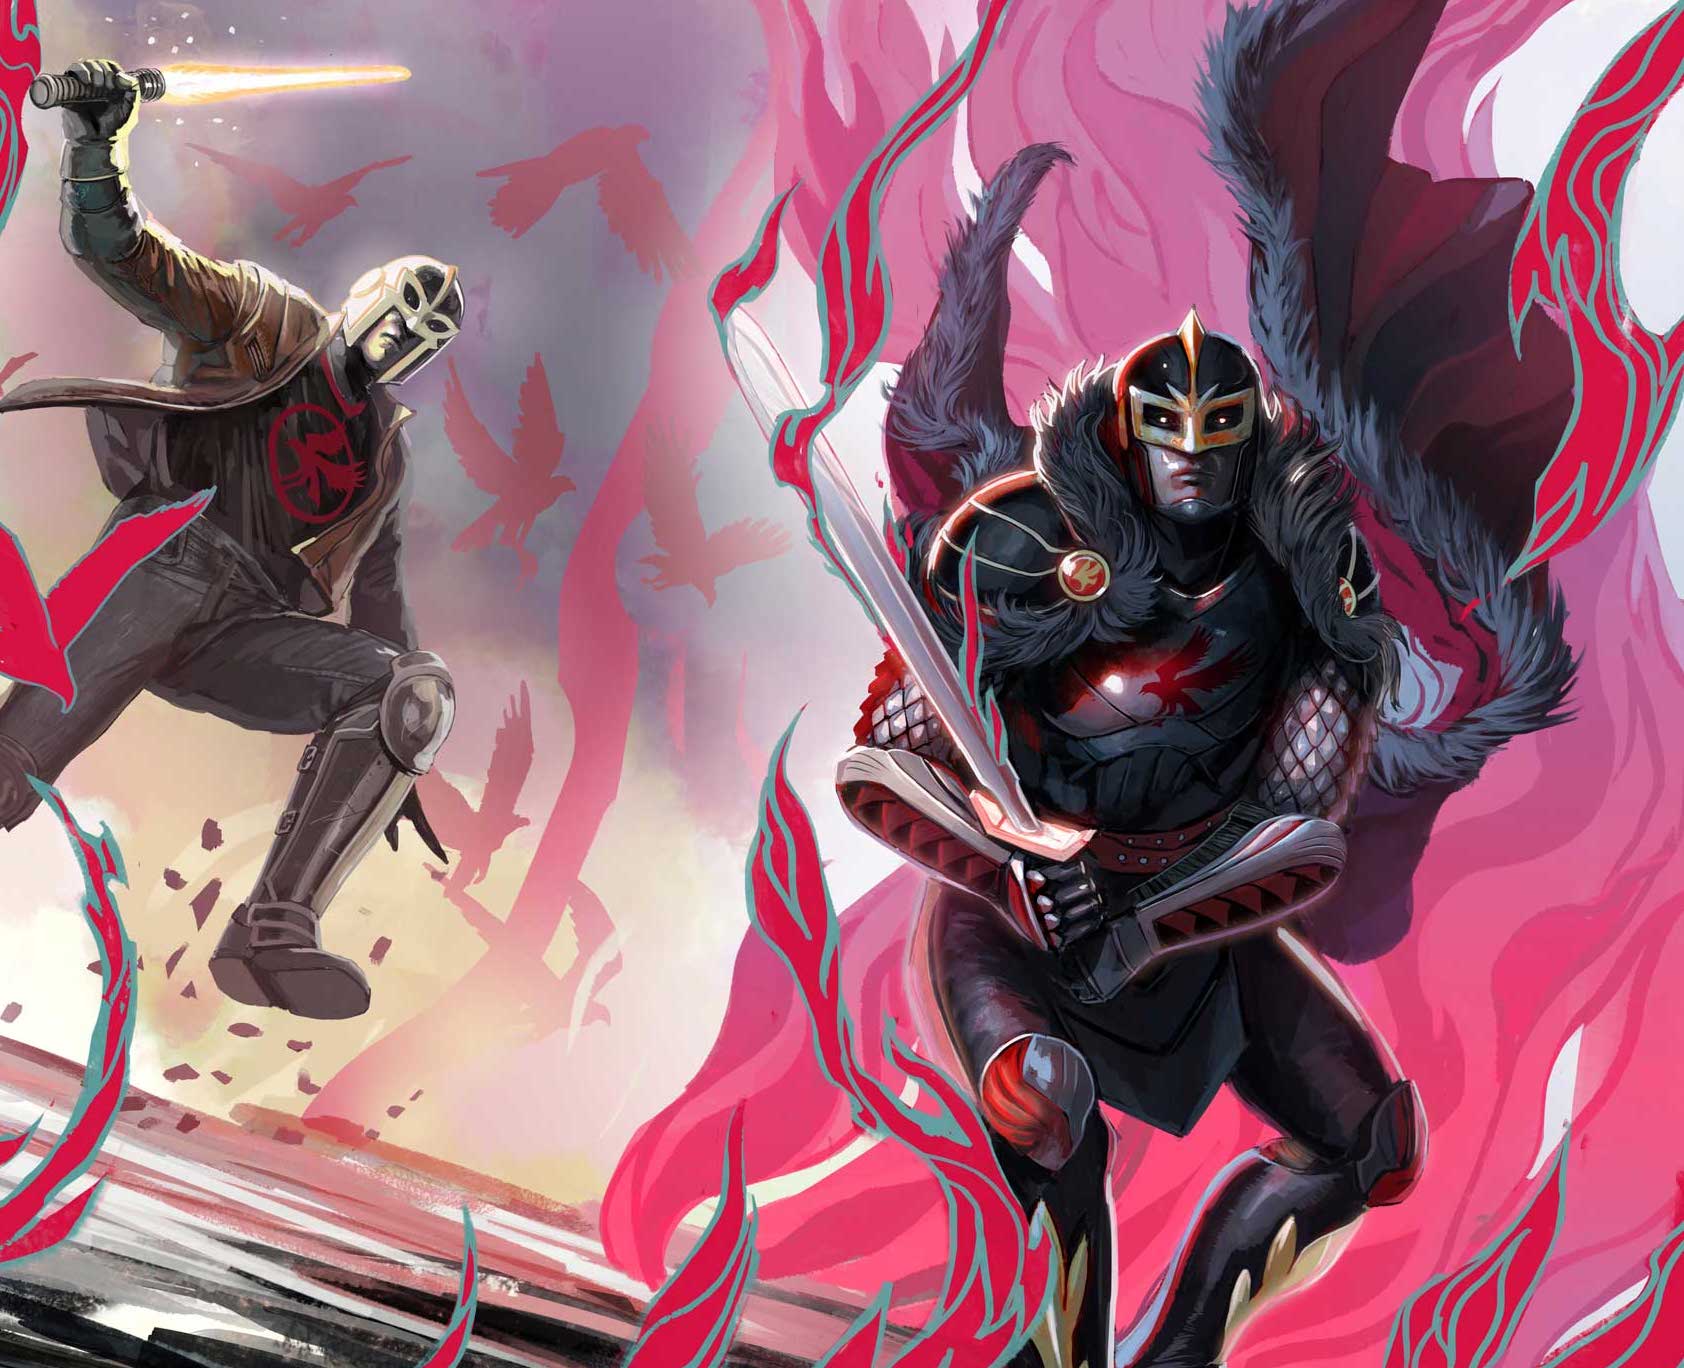 Marvel reveals full Stephanie Hans 'Black Knight' connecting cover